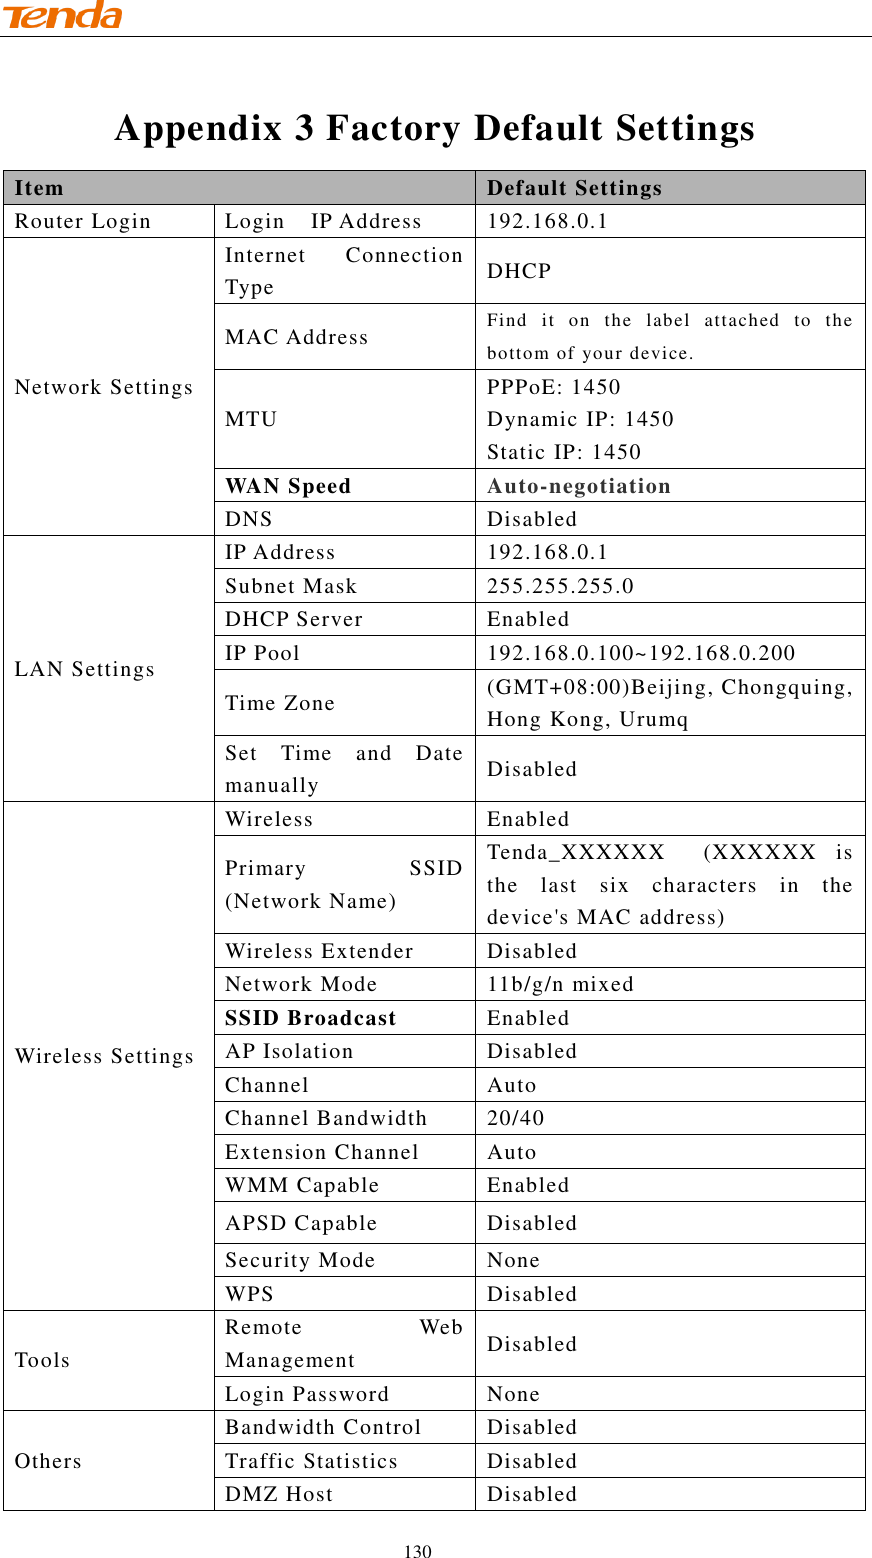                                    130 Appendix 3 Factory Default Settings Item Default Settings Router Login Login    IP Address 192.168.0.1 Network Settings Internet  Connection Type DHCP MAC Address Find  it  on  the  label  attached  to  the bottom of your device. MTU PPPoE: 1450 Dynamic IP: 1450 Static IP: 1450 WAN Speed Auto-negotiation DNS Disabled LAN Settings IP Address 192.168.0.1 Subnet Mask 255.255.255.0 DHCP Server Enabled IP Pool 192.168.0.100~192.168.0.200 Time Zone (GMT+08:00)Beijing, Chongquing, Hong Kong, Urumq Set  Time  and  Date manually Disabled Wireless Settings Wireless Enabled Primary  SSID (Network Name) Tenda_XXXXXX    (XXXXXX  is the  last  six  characters  in  the device&apos;s MAC address) Wireless Extender Disabled Network Mode 11b/g/n mixed SSID Broadcast Enabled AP Isolation Disabled Channel Auto Channel Bandwidth 20/40 Extension Channel Auto WMM Capable Enabled APSD Capable Disabled Security Mode None WPS Disabled Tools Remote  Web Management Disabled Login Password None Others Bandwidth Control Disabled Traffic Statistics Disabled DMZ Host Disabled 